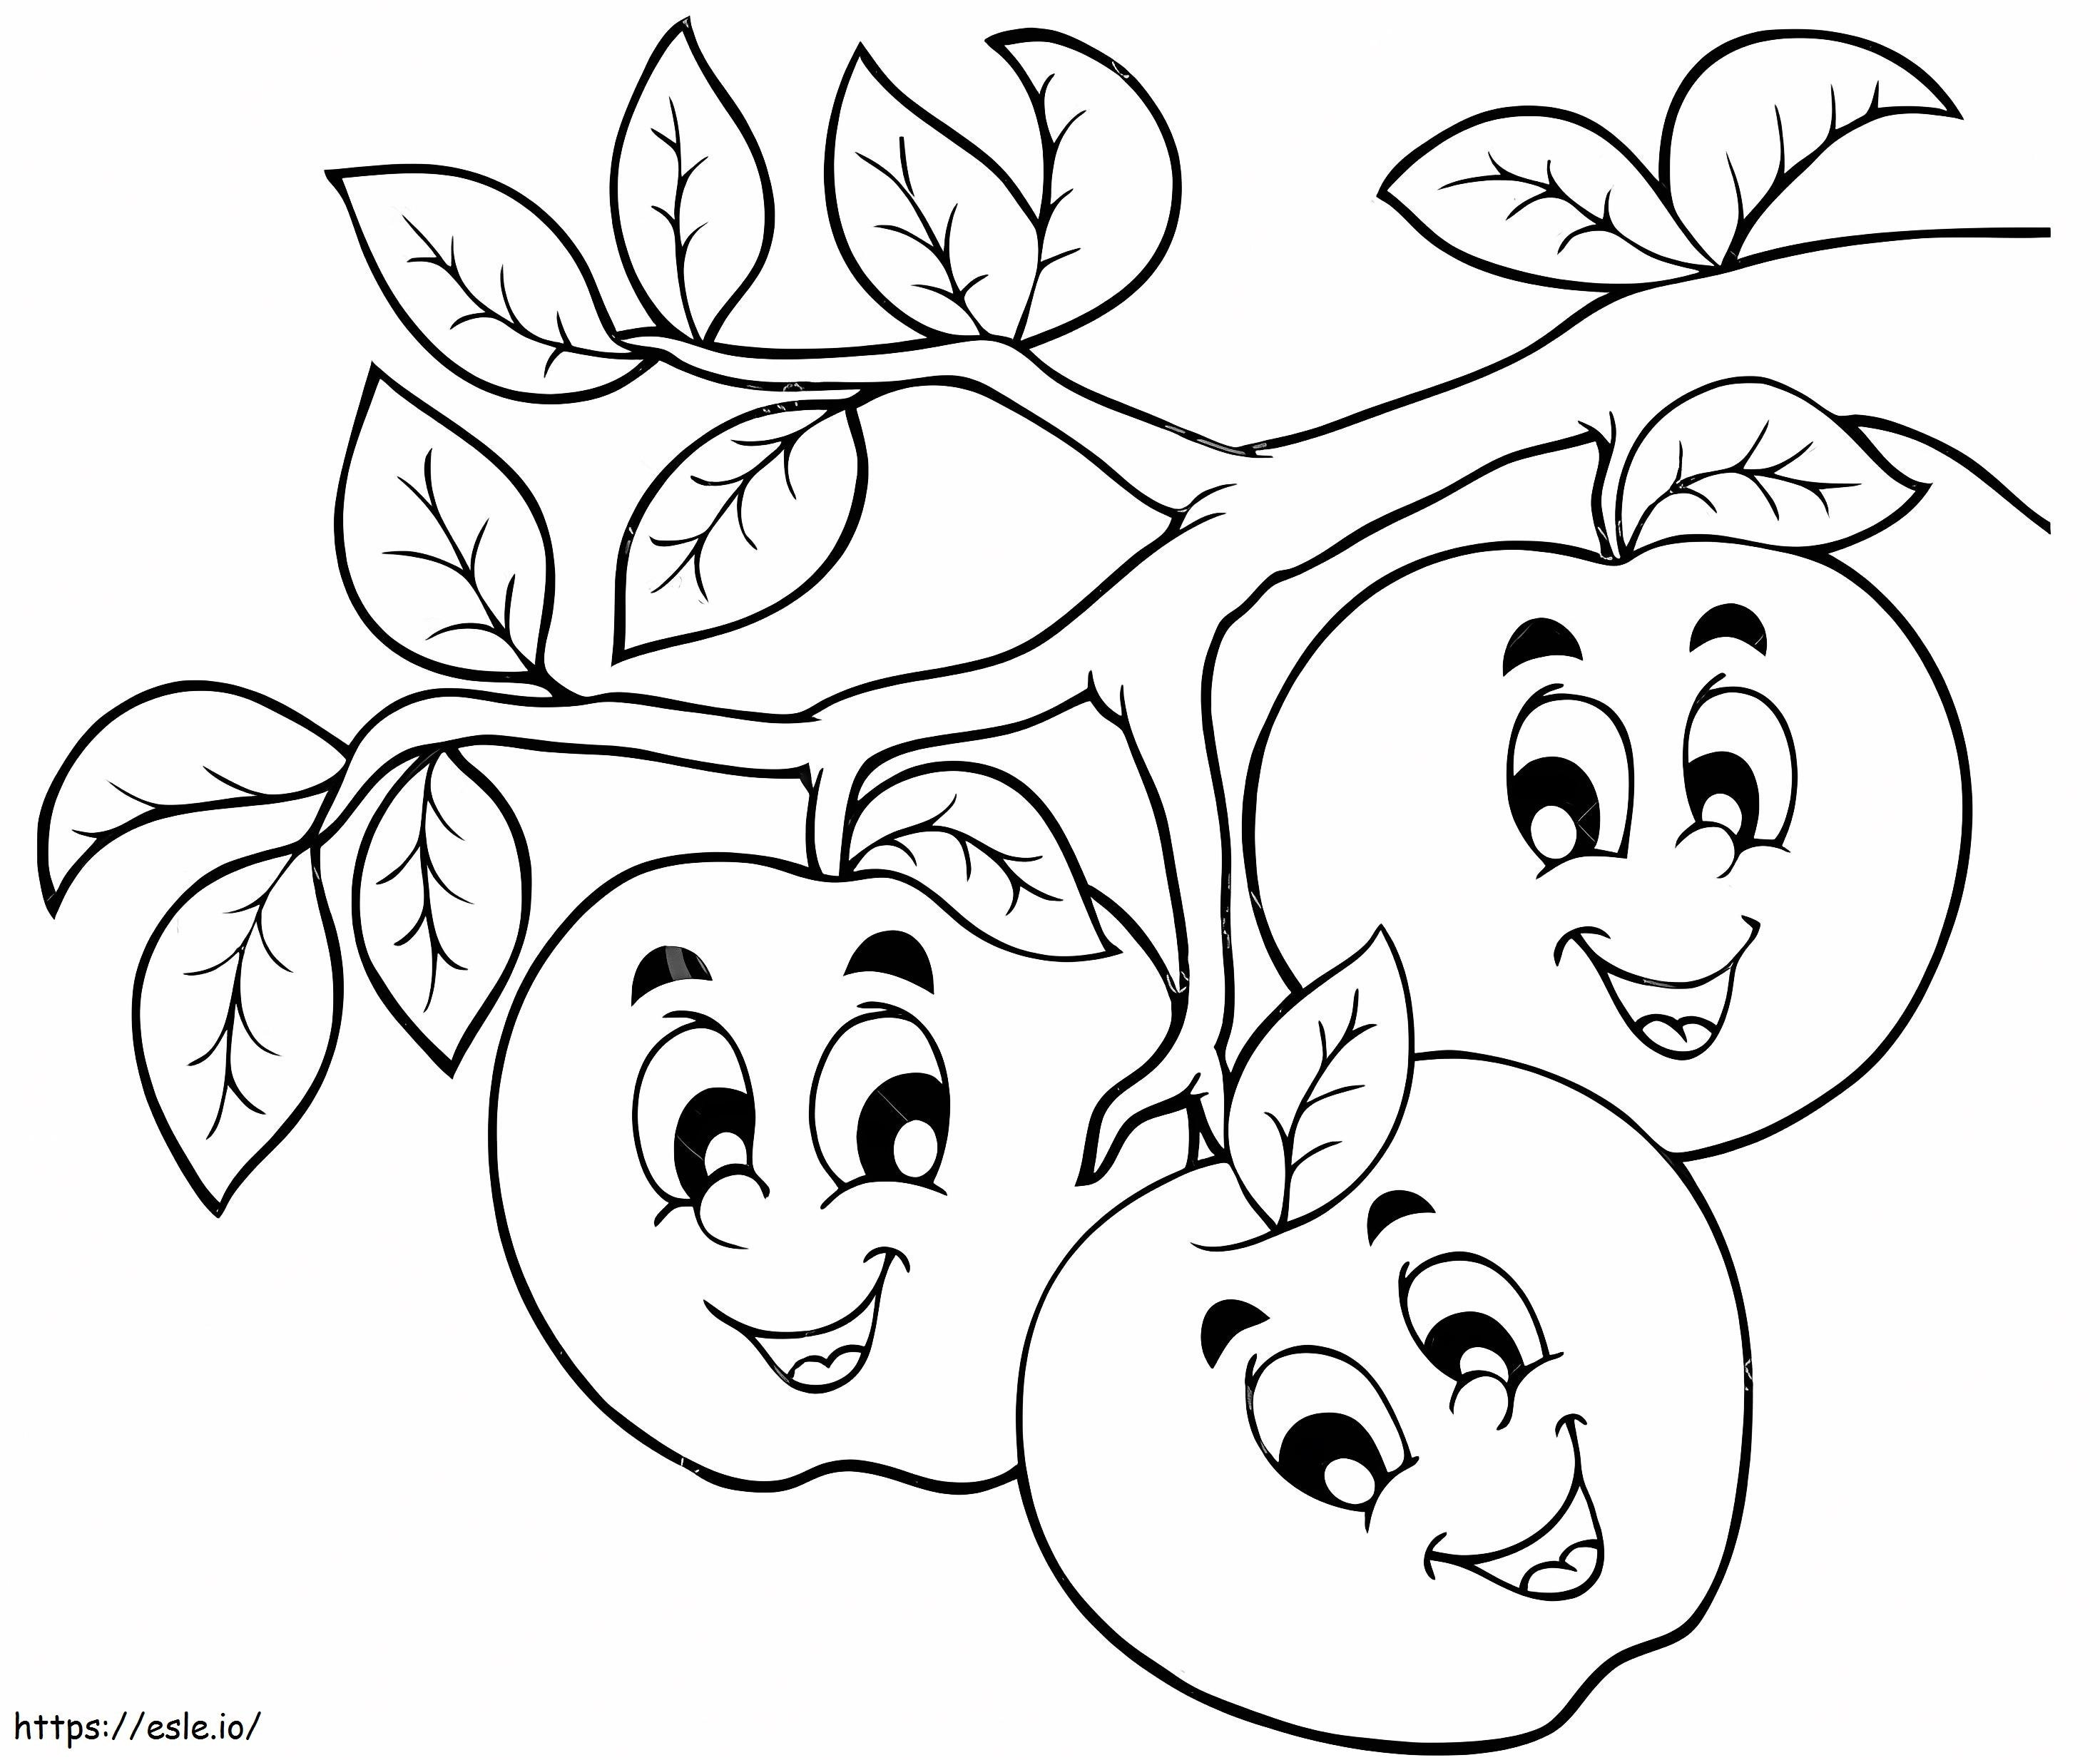 Three Cartoon Apples On The Tree coloring page